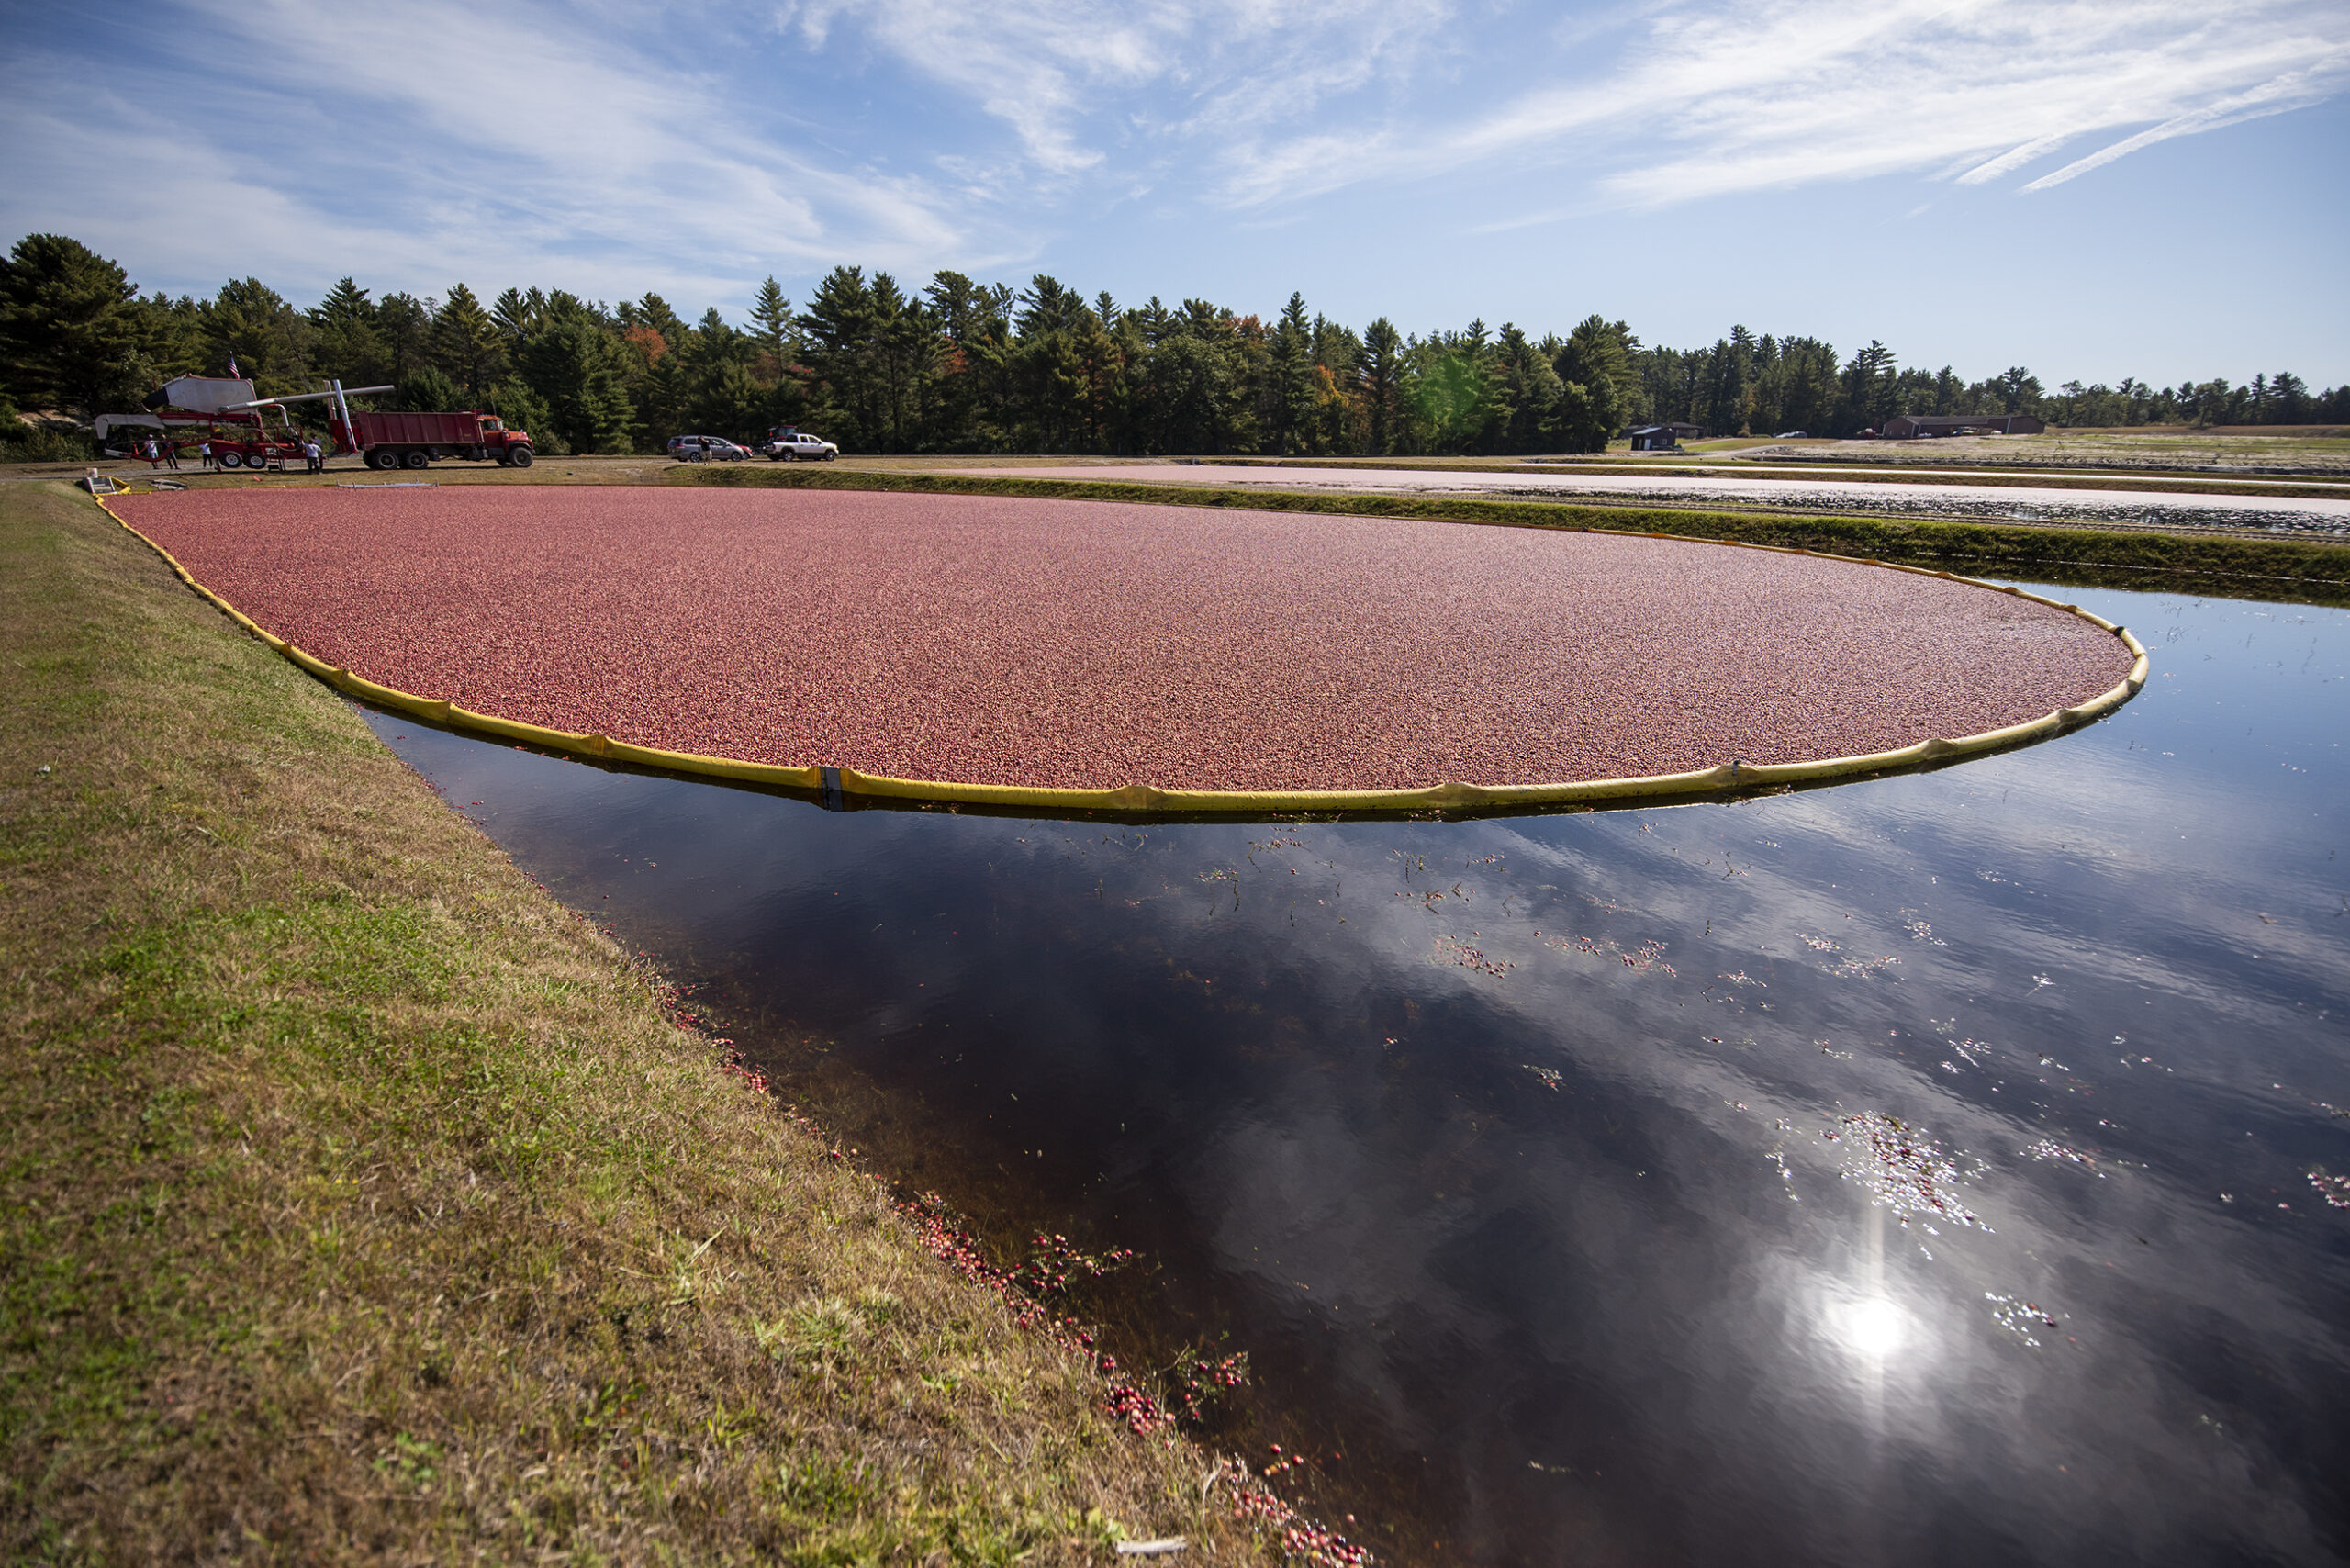 Cranberries float on top of water in a sectioned-off area before harvest.